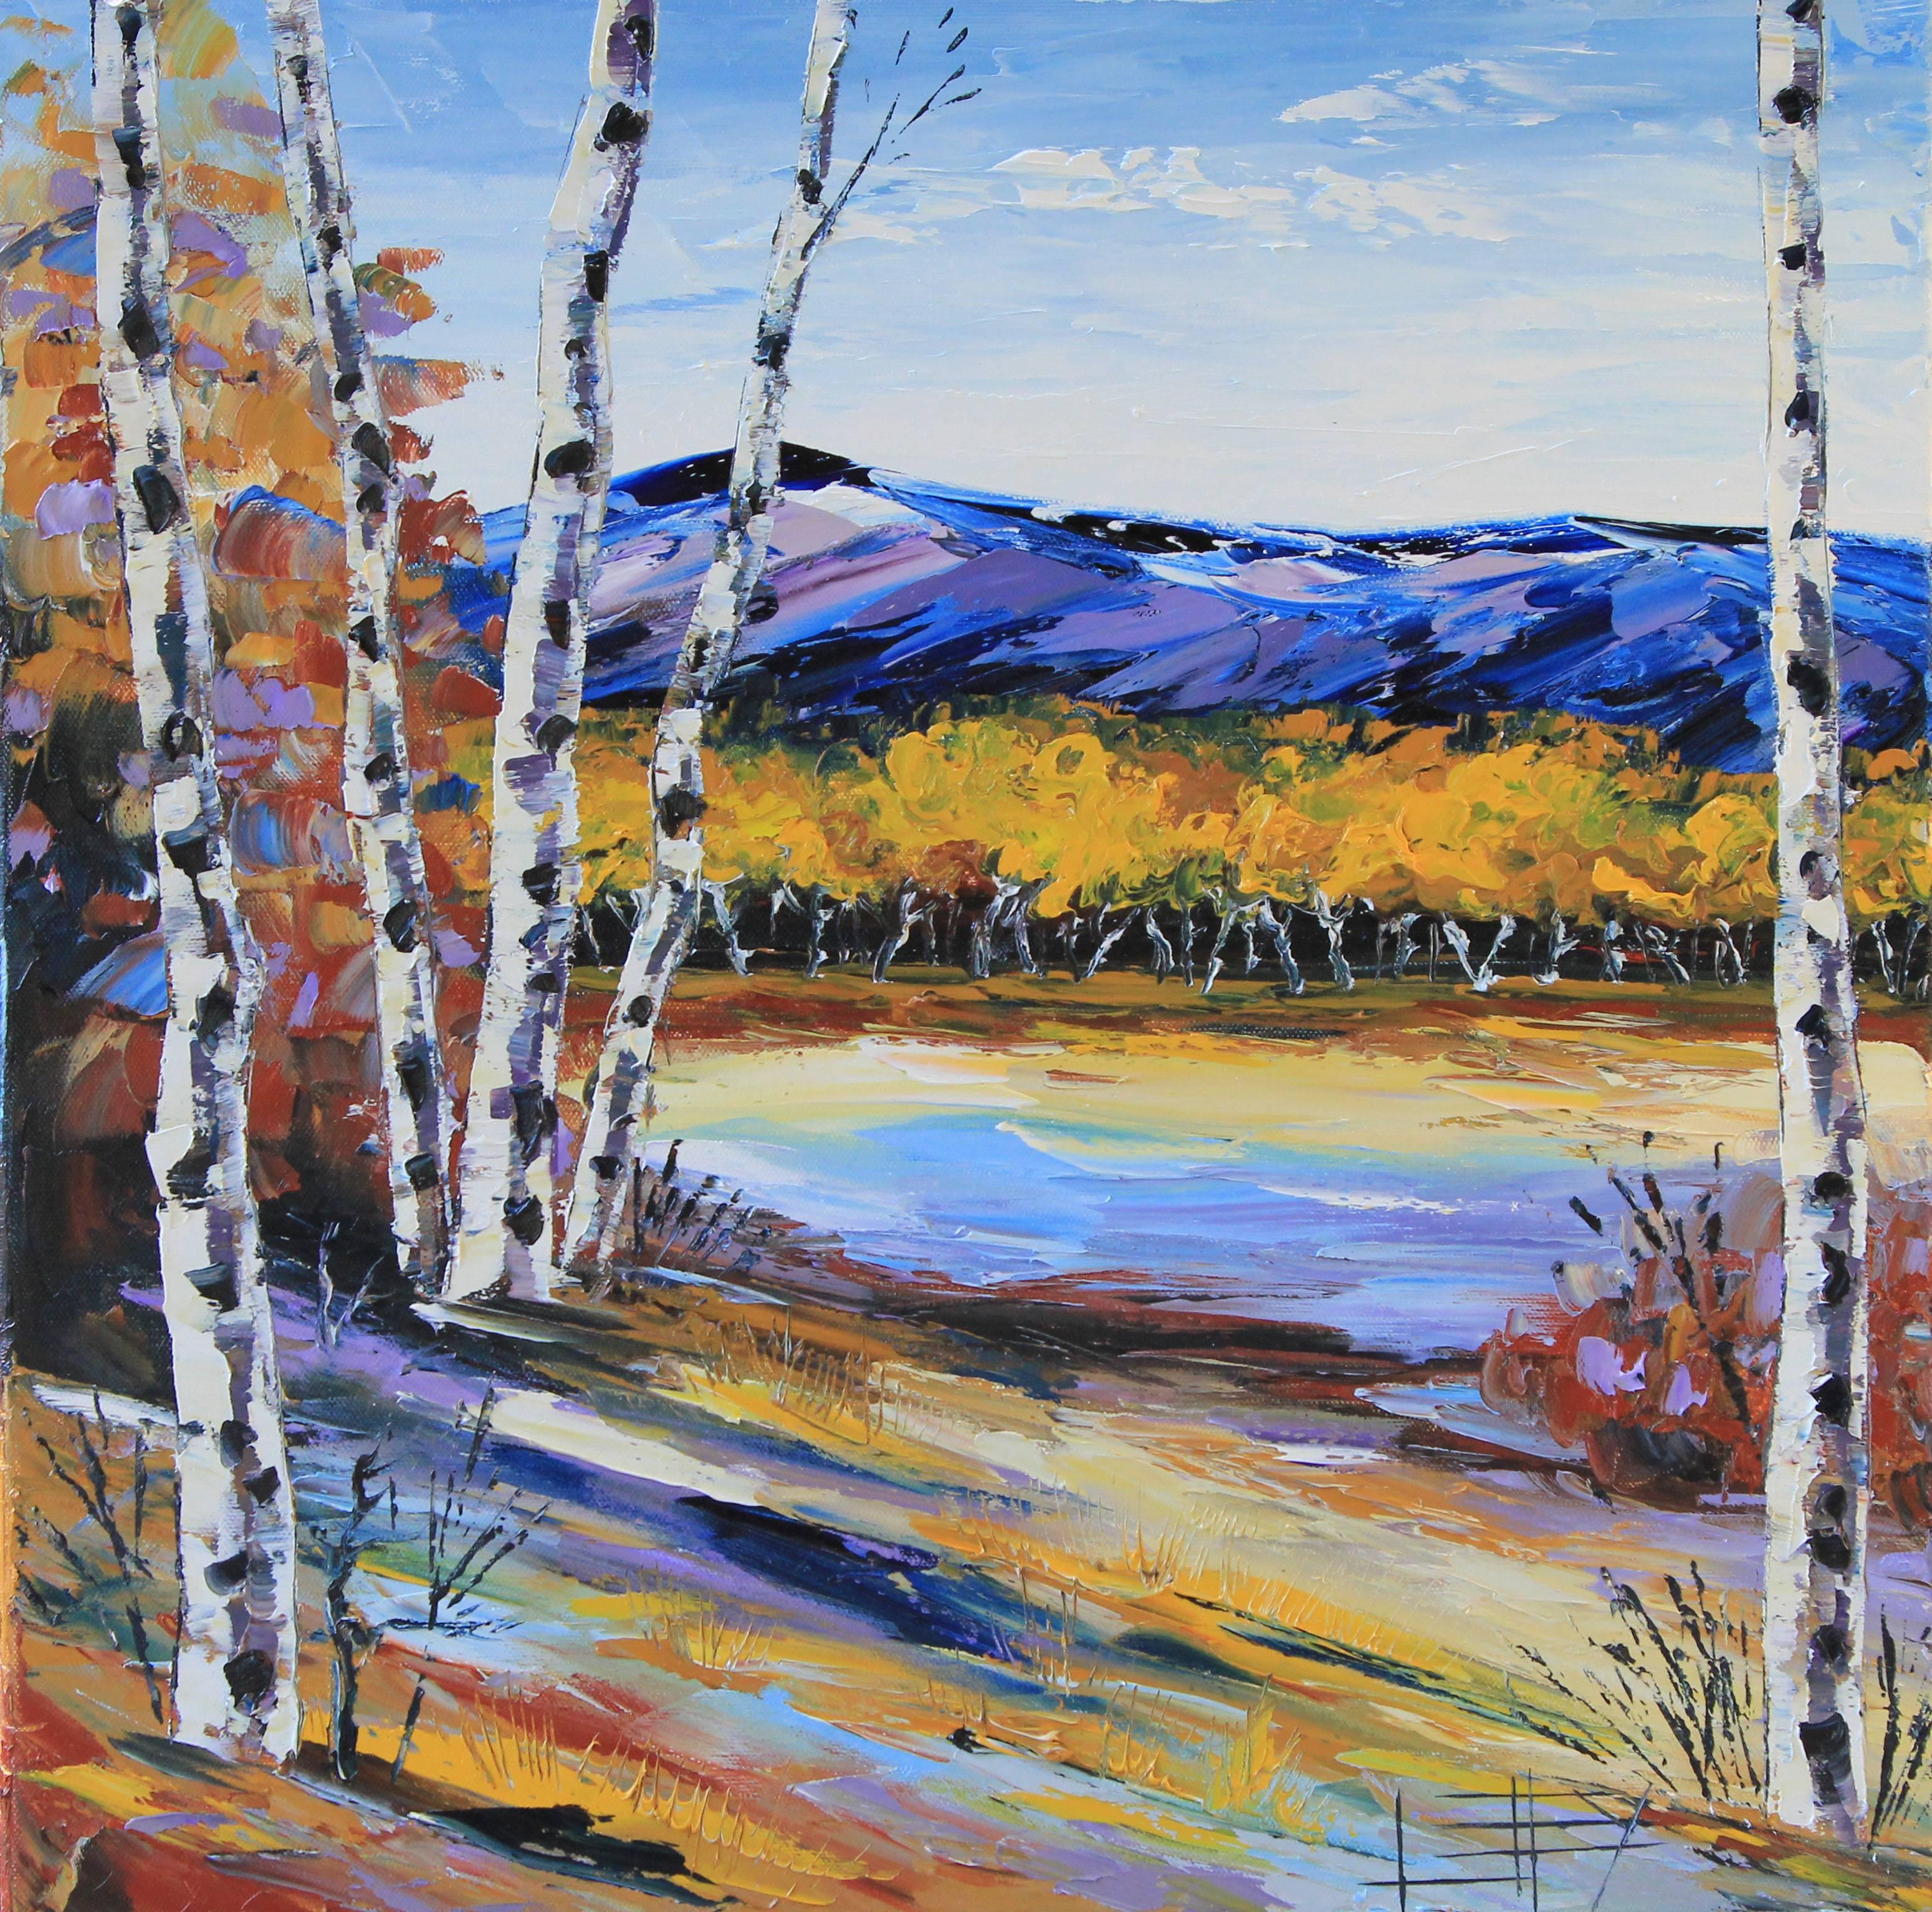 Beautiful Birch Lisa Elley Oil painting on stretched canvas
One-of-a-kind
Signed on front and back
2016
20 in. h x 20 in. w x .75 in. d
1 lbs. 0 oz. Artist Comments 
Whether it's fall, winter, spring or summer it's always time for some colorful